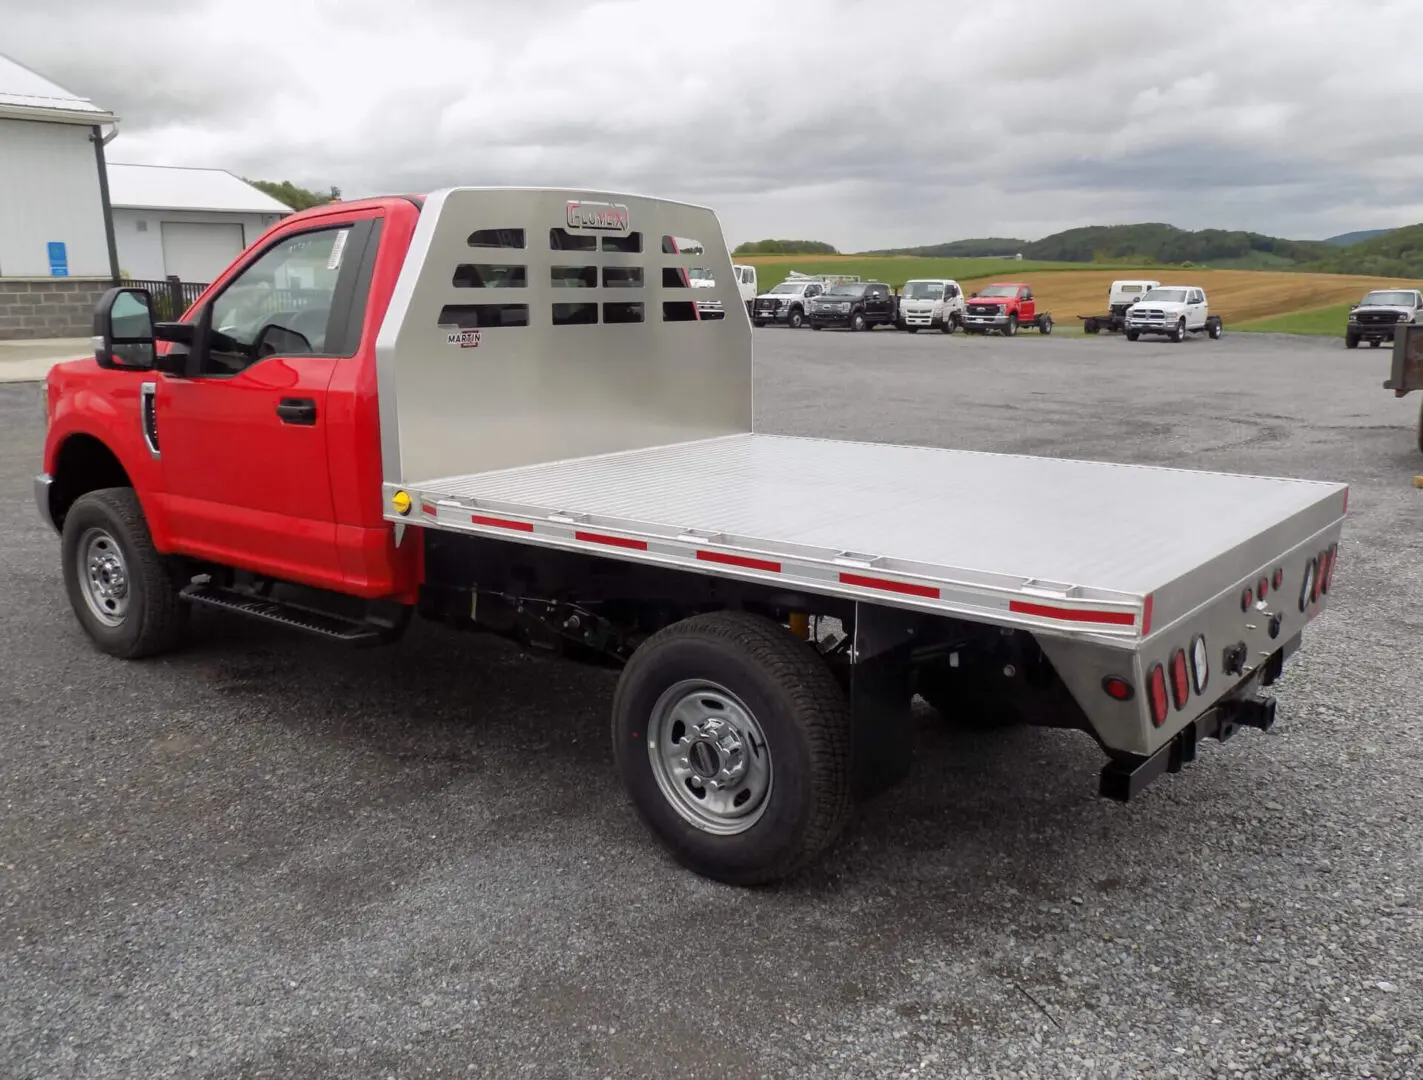 Red pickup truck with a white trailer attachment at the back